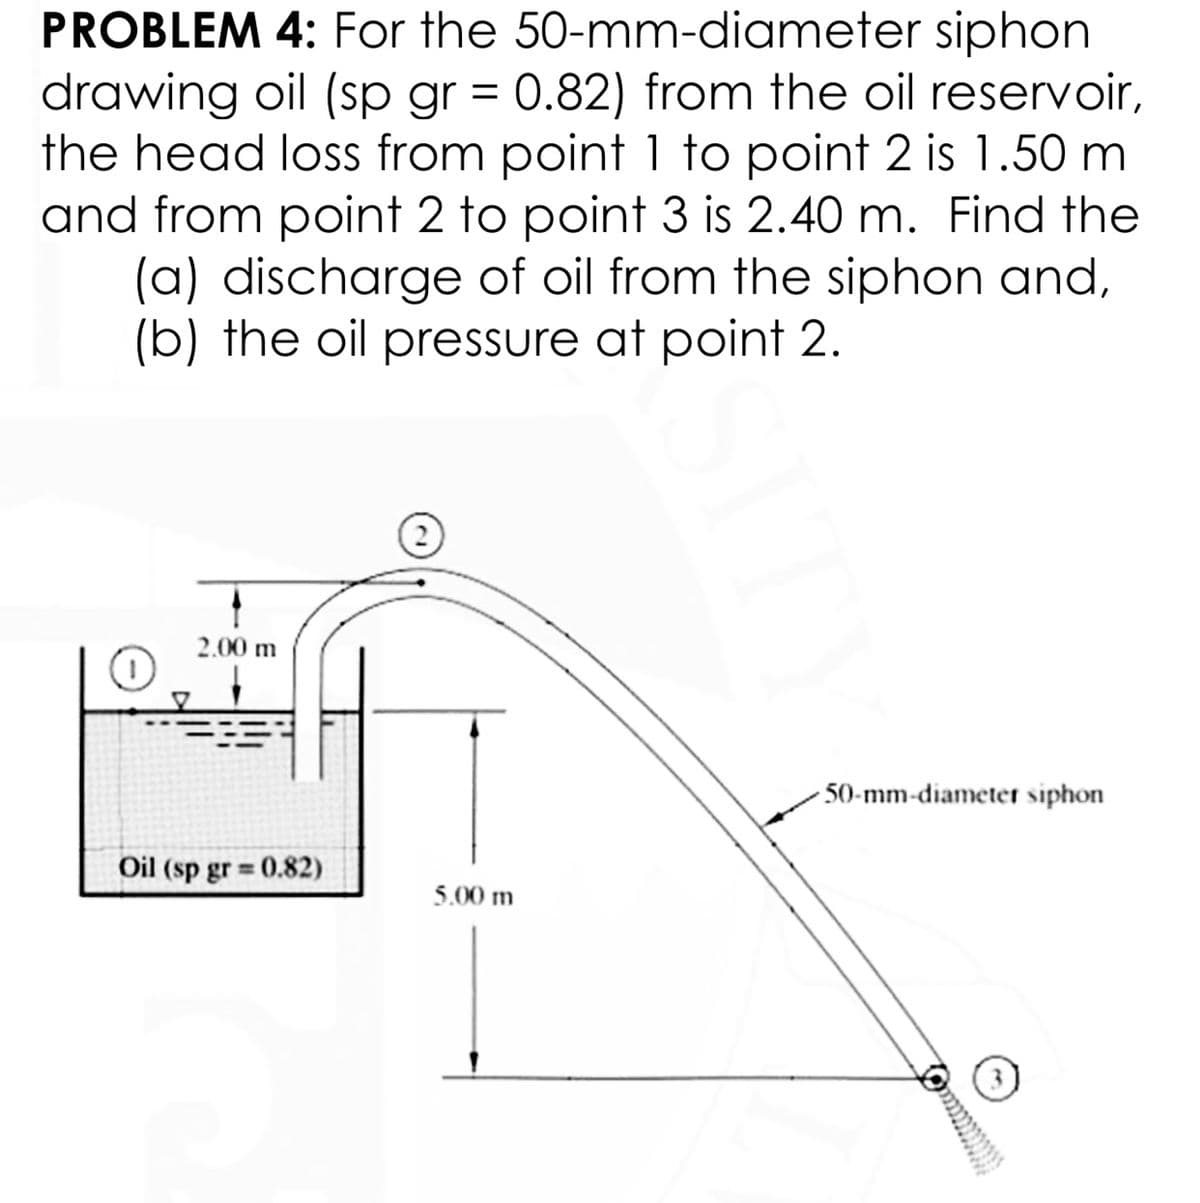 siphon
PROBLEM 4: For the 50-mm-diameter
drawing oil (sp gr = 0.82) from the oil reservoir,
the head loss from point 1 to point 2 is 1.50 m
and from point 2 to point 3 is 2.40 m. Find the
(a) discharge of oil from the siphon and,
(b) the oil pressure at point 2.
2.00 m
50-mm-diameter siphon
Oil (sp gr=0.82)
5.00 m
Om